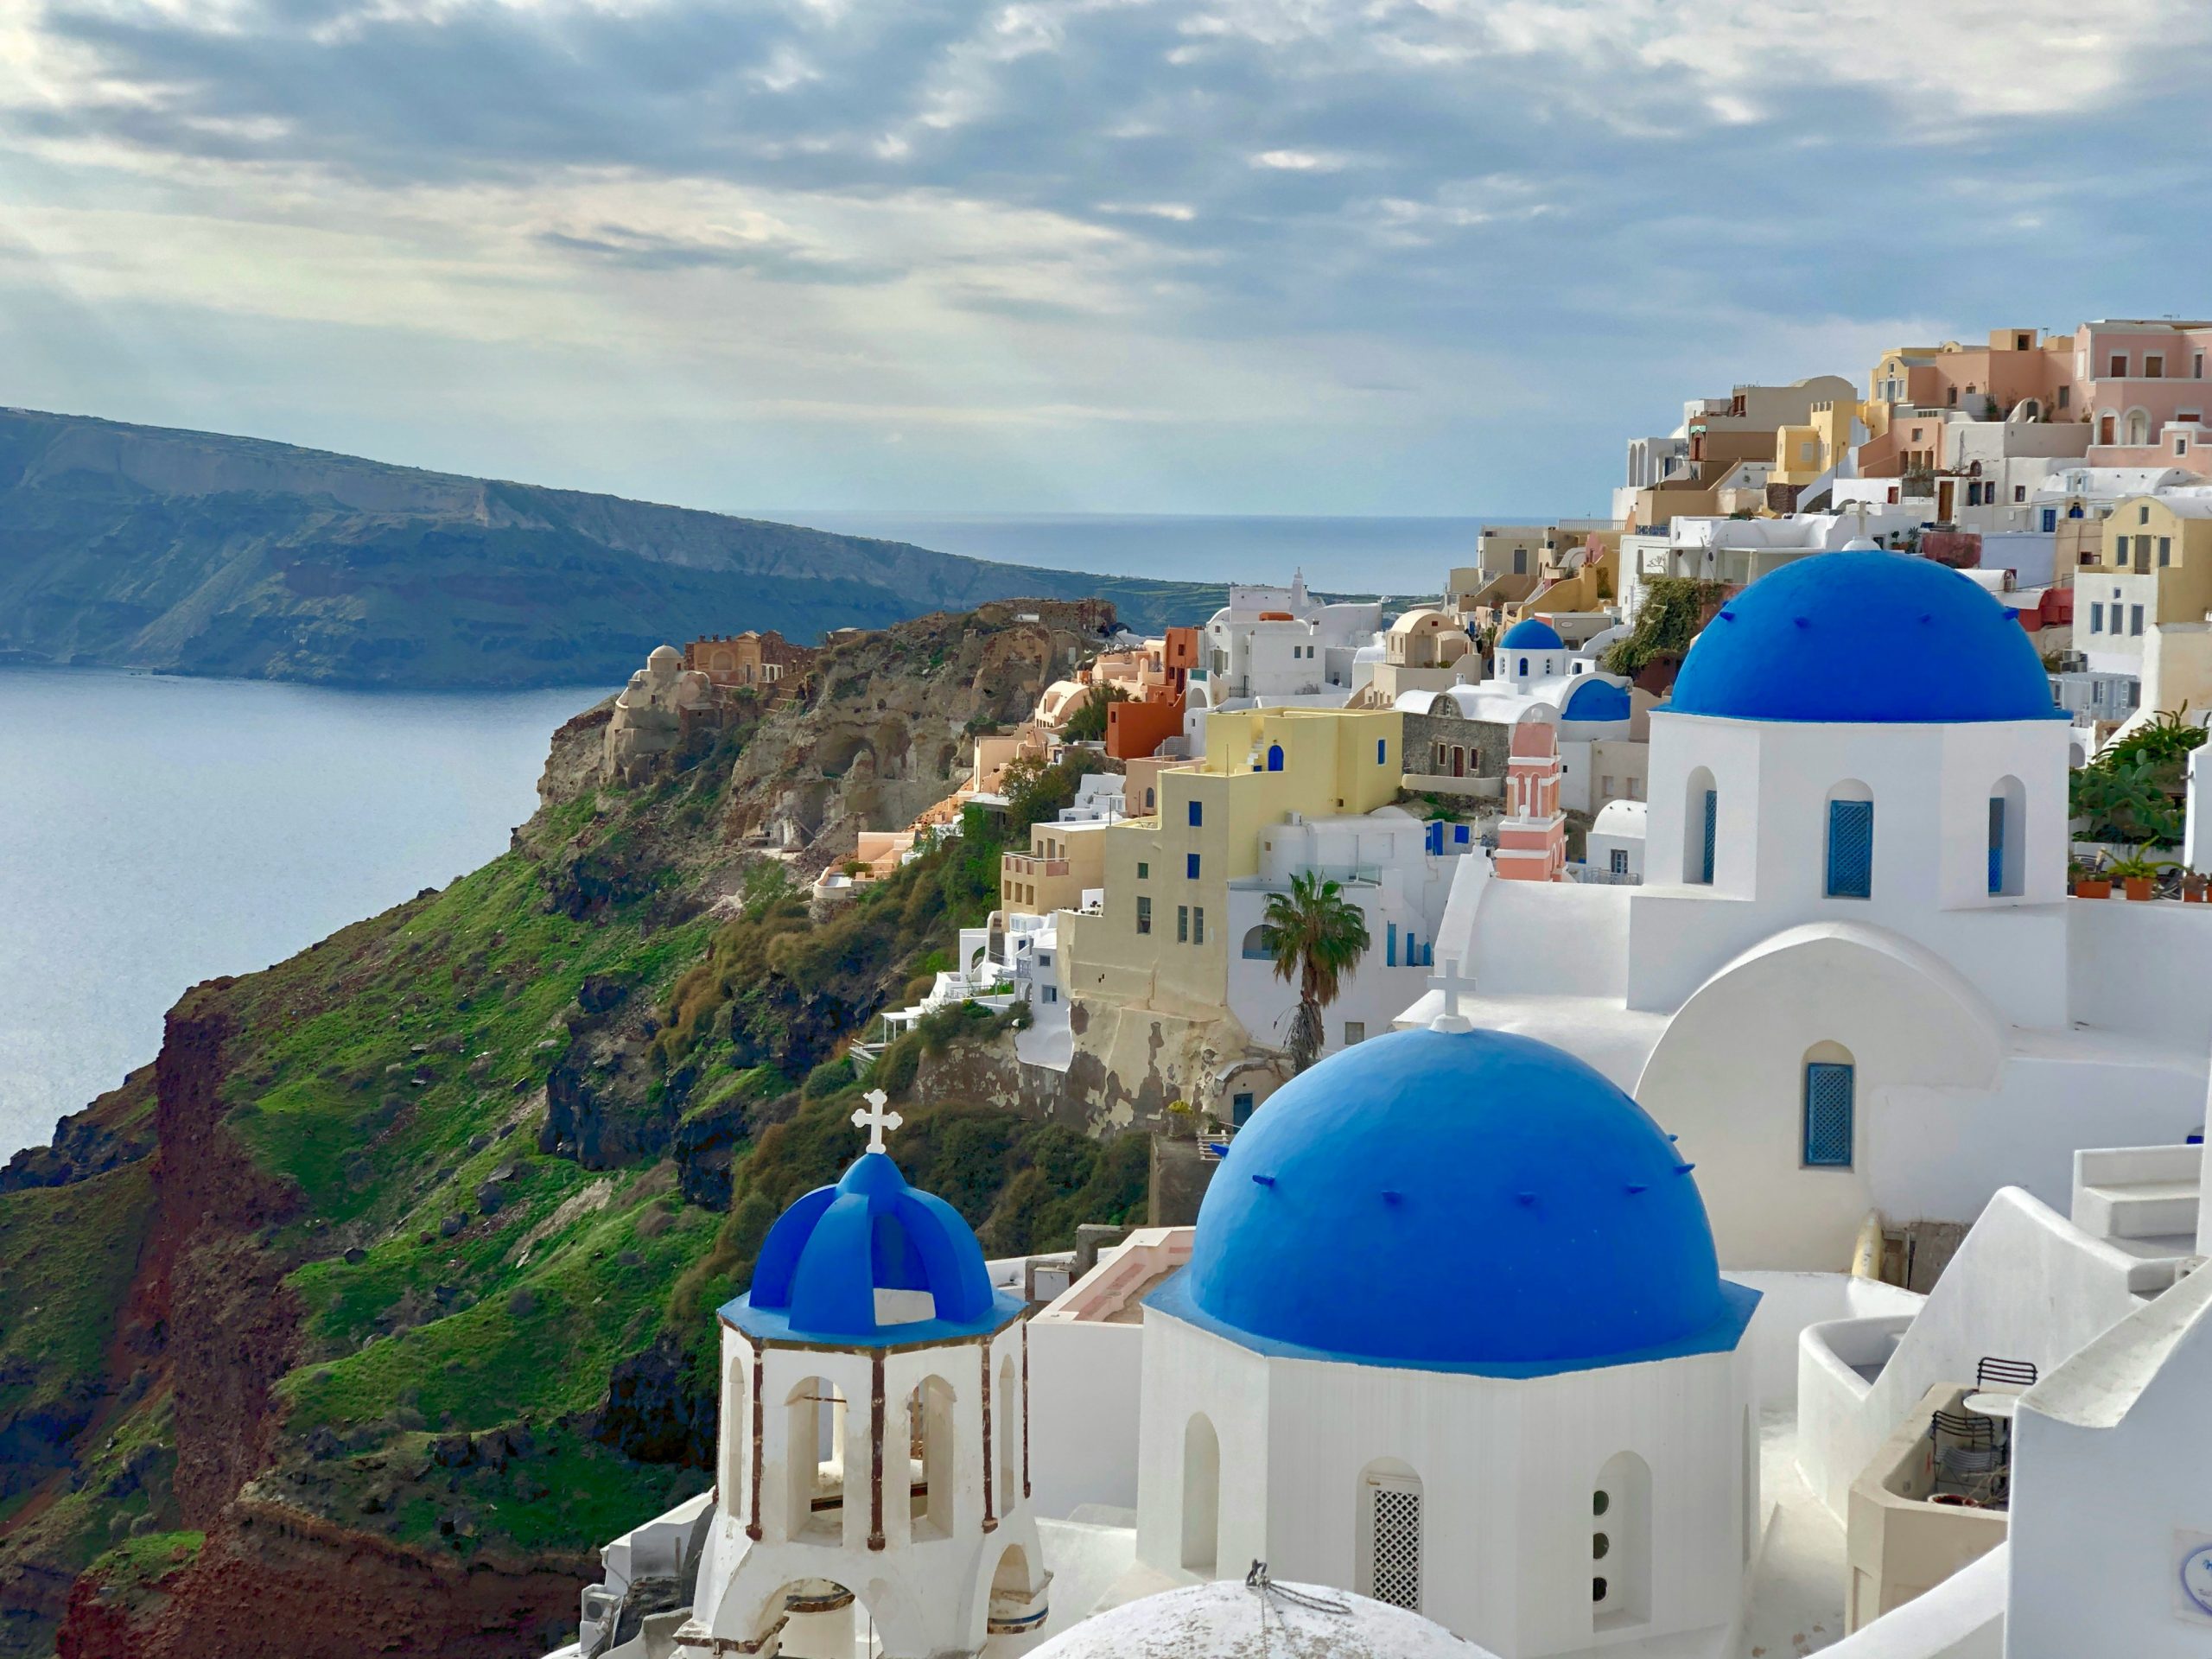 discover the beauty of santorini with its stunning whitewashed buildings, crystal-clear waters, and breathtaking sunsets. plan your perfect mediterranean escape today!